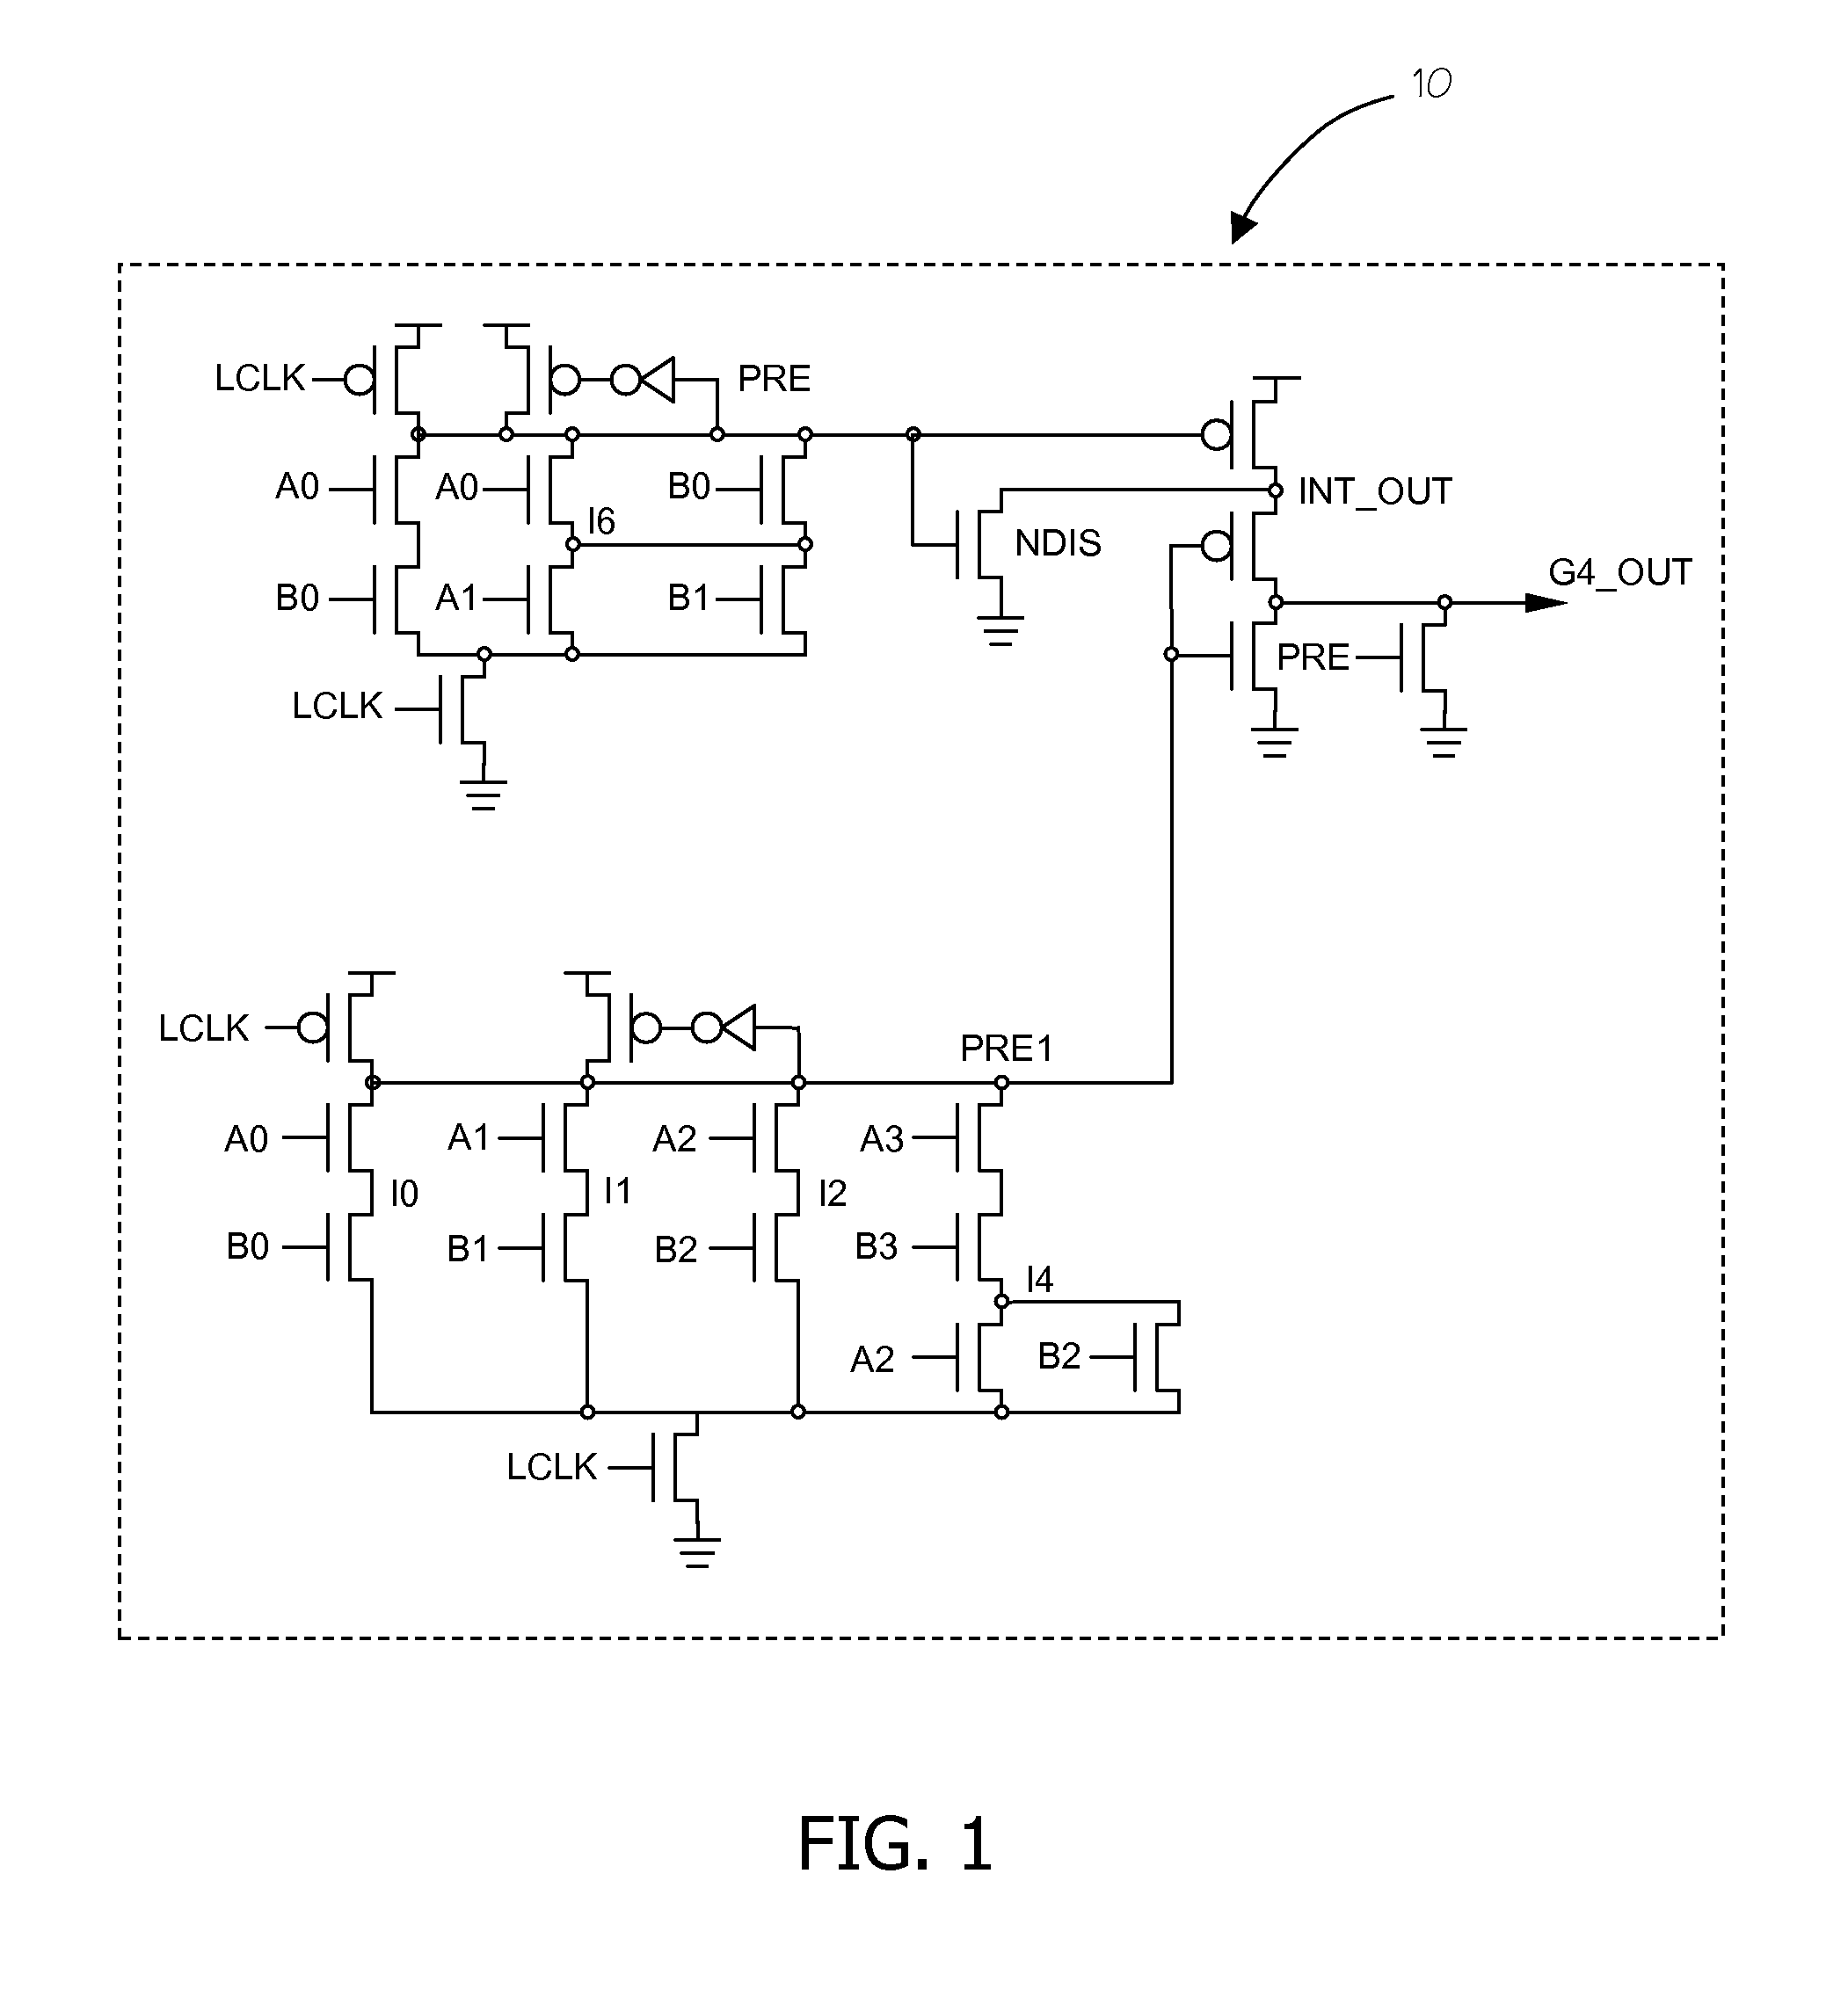 Method and apparatus for generating adaptive noise and timing models for VLSI signal integrity analysis